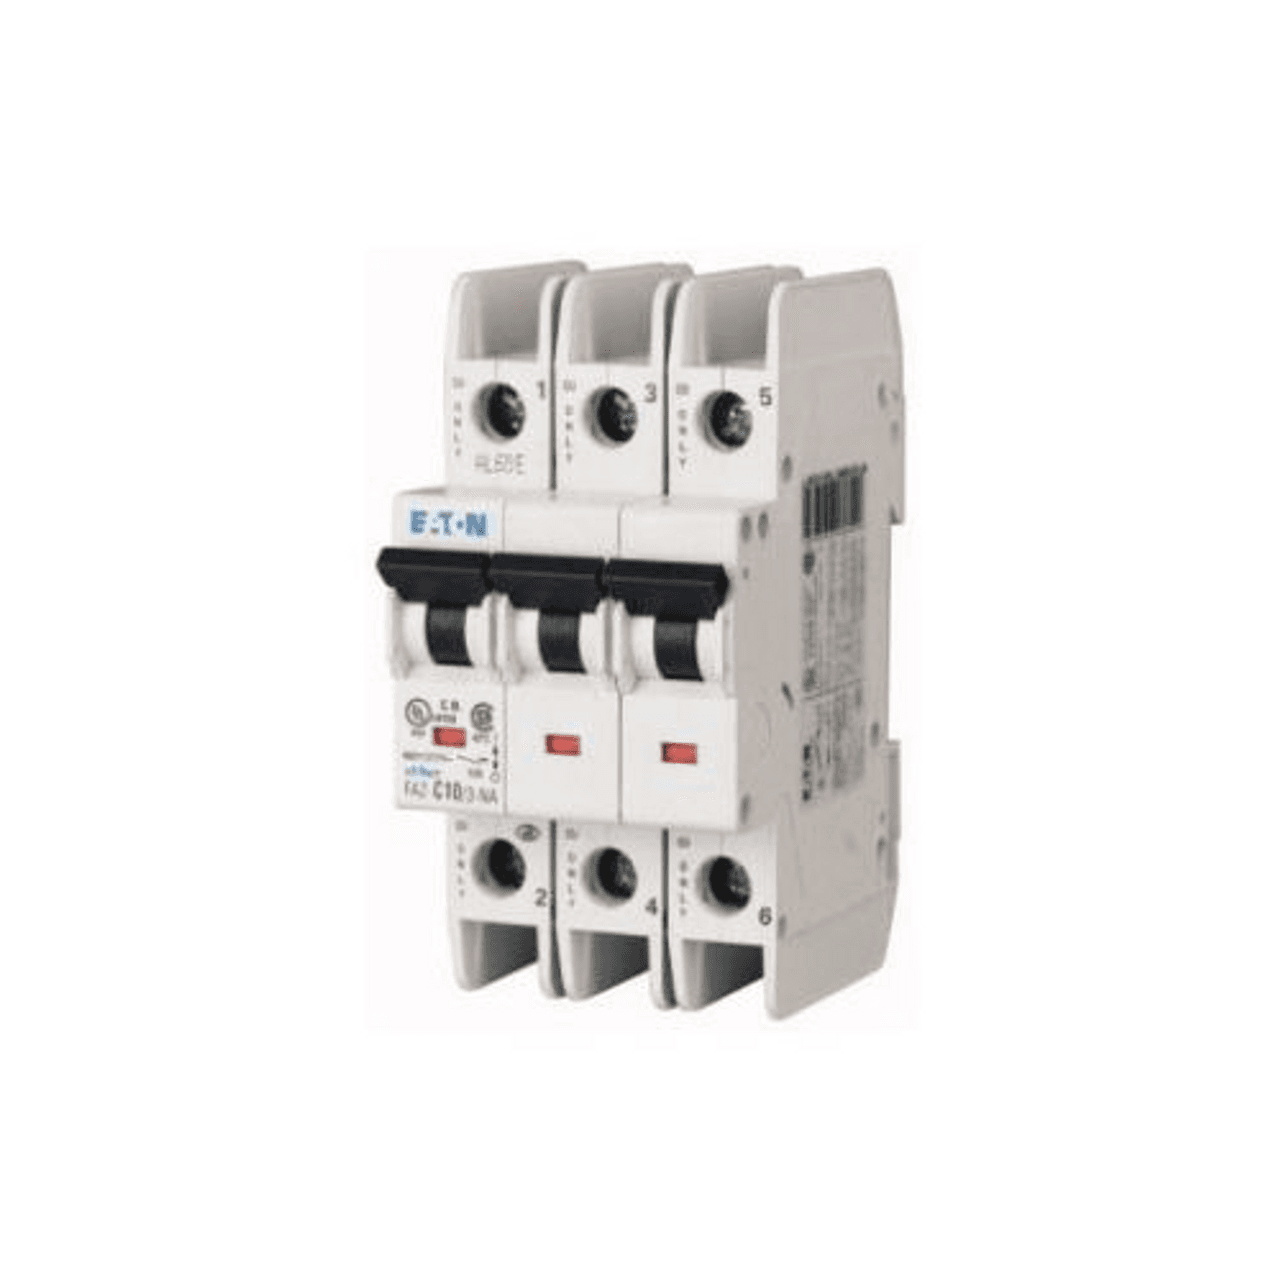 Eaton FAZ-C15/3-NA 277/480 VAC 50/60 Hz, 15 A, 3-Pole, 10/14 kA, 5 to 10 x Rated Current, Screw Terminal, DIN Rail Mount, Standard Packaging, C-Curve, Current Limiting, Thermal Magnetic, Miniature Circuit Breaker